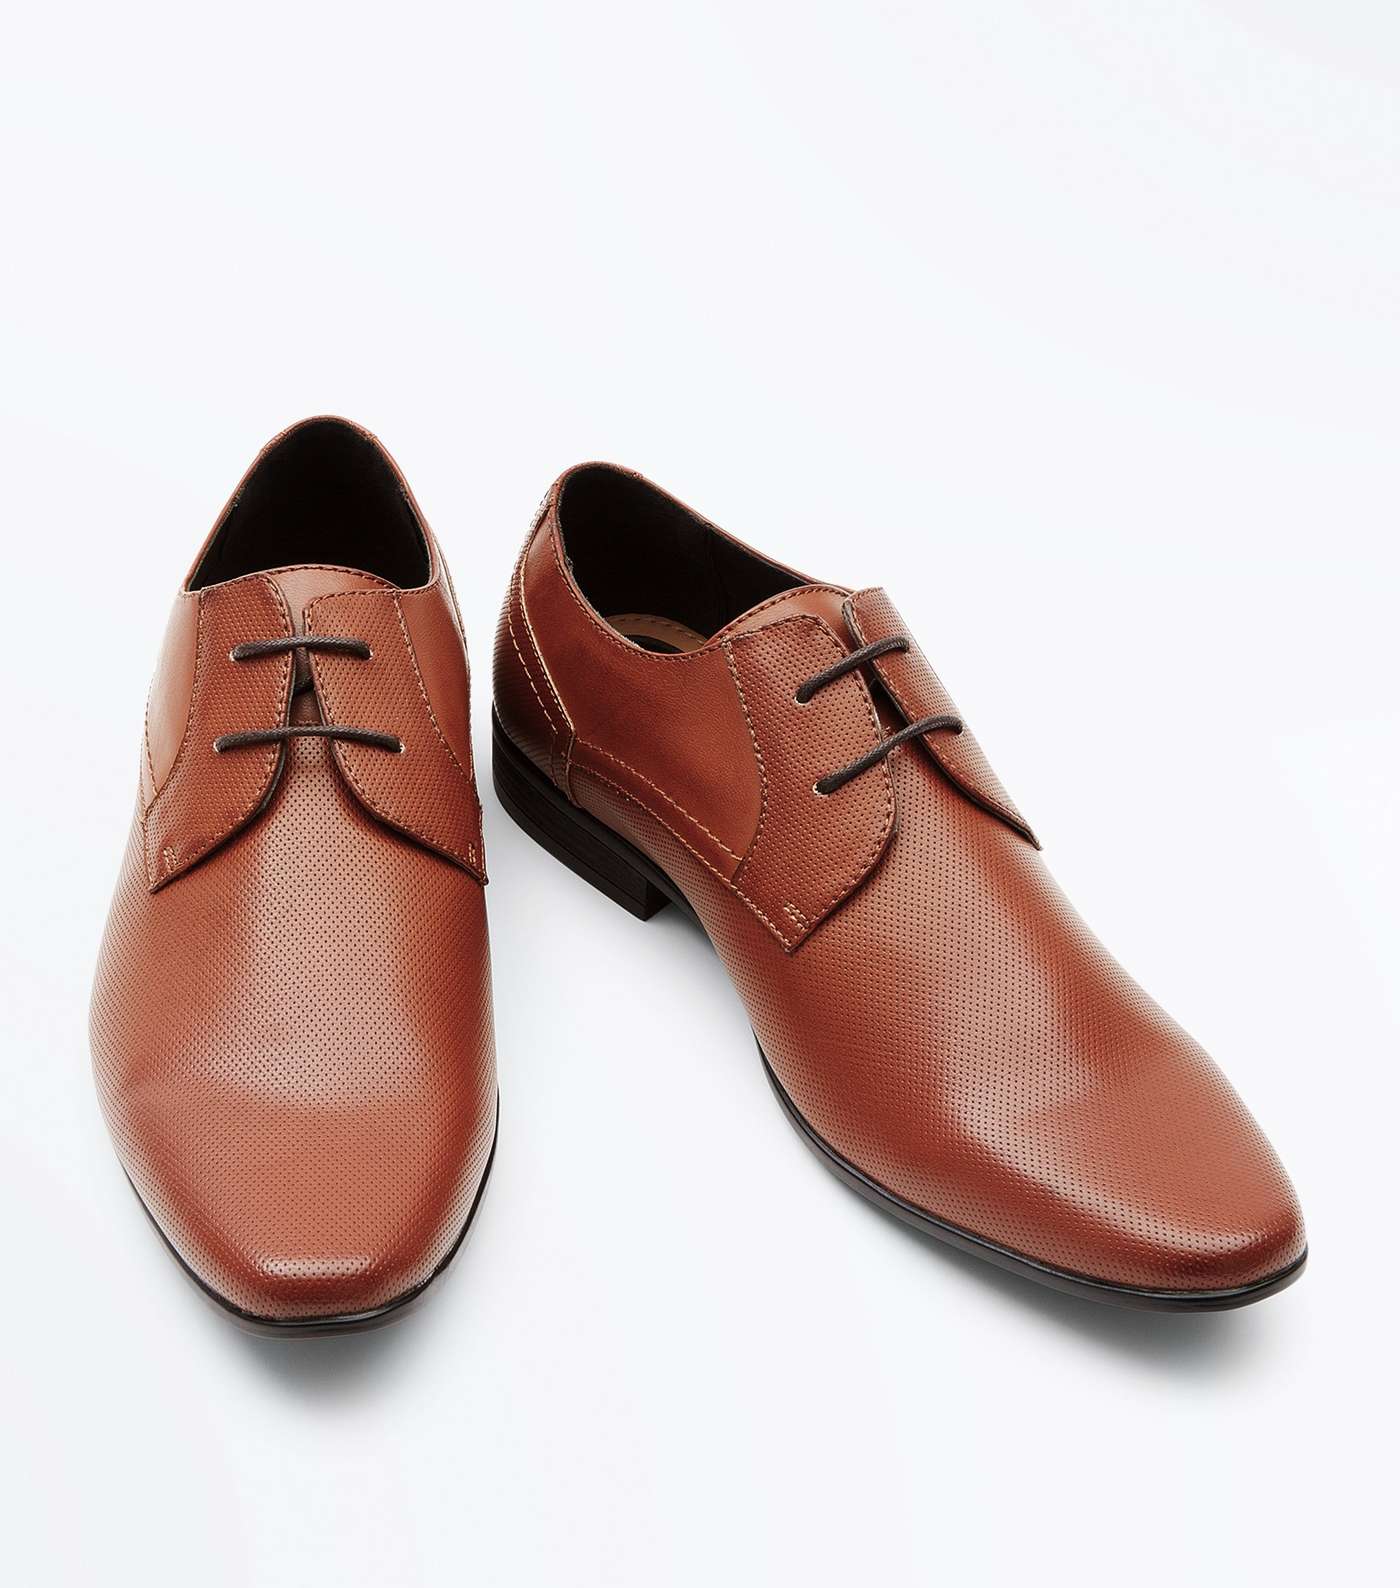 Tan Perforated Formal Shoes Image 3